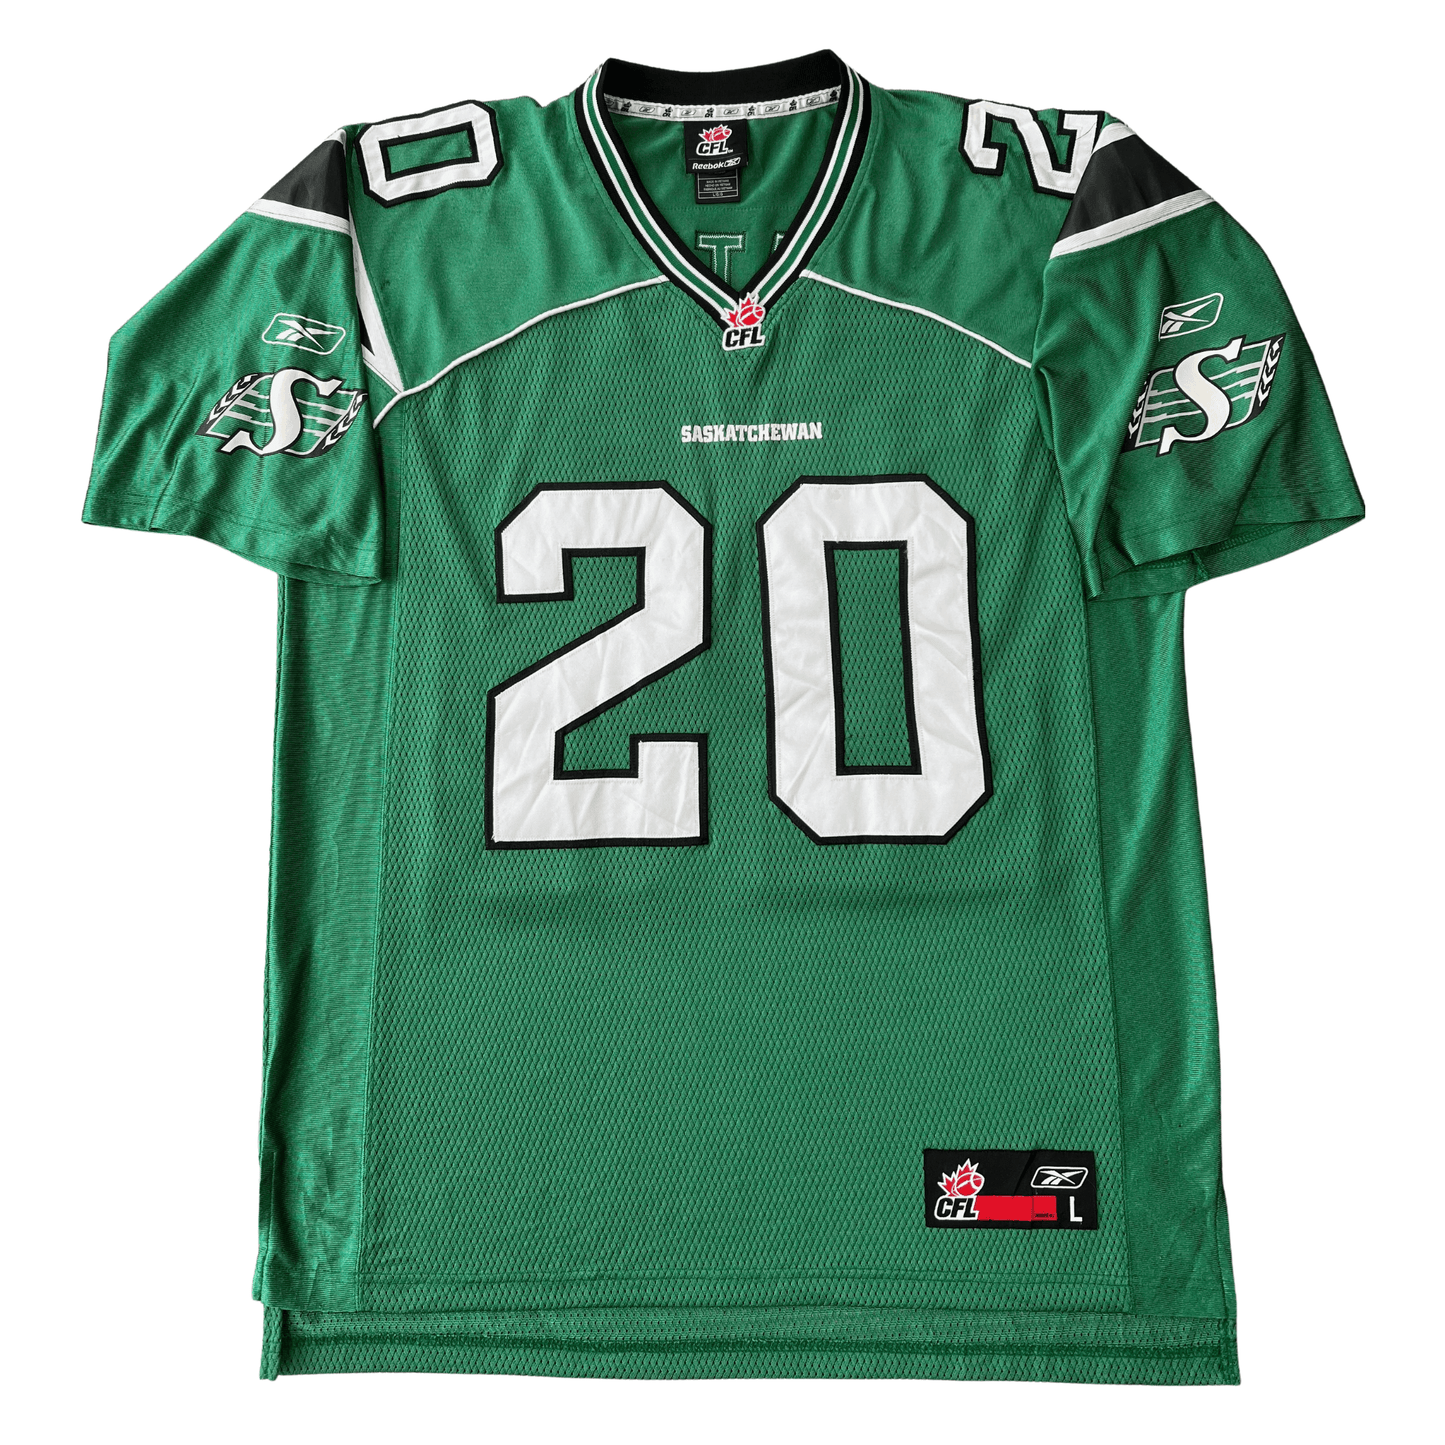 Saskatchewan Roughriders Jersey Front - Wes Cates